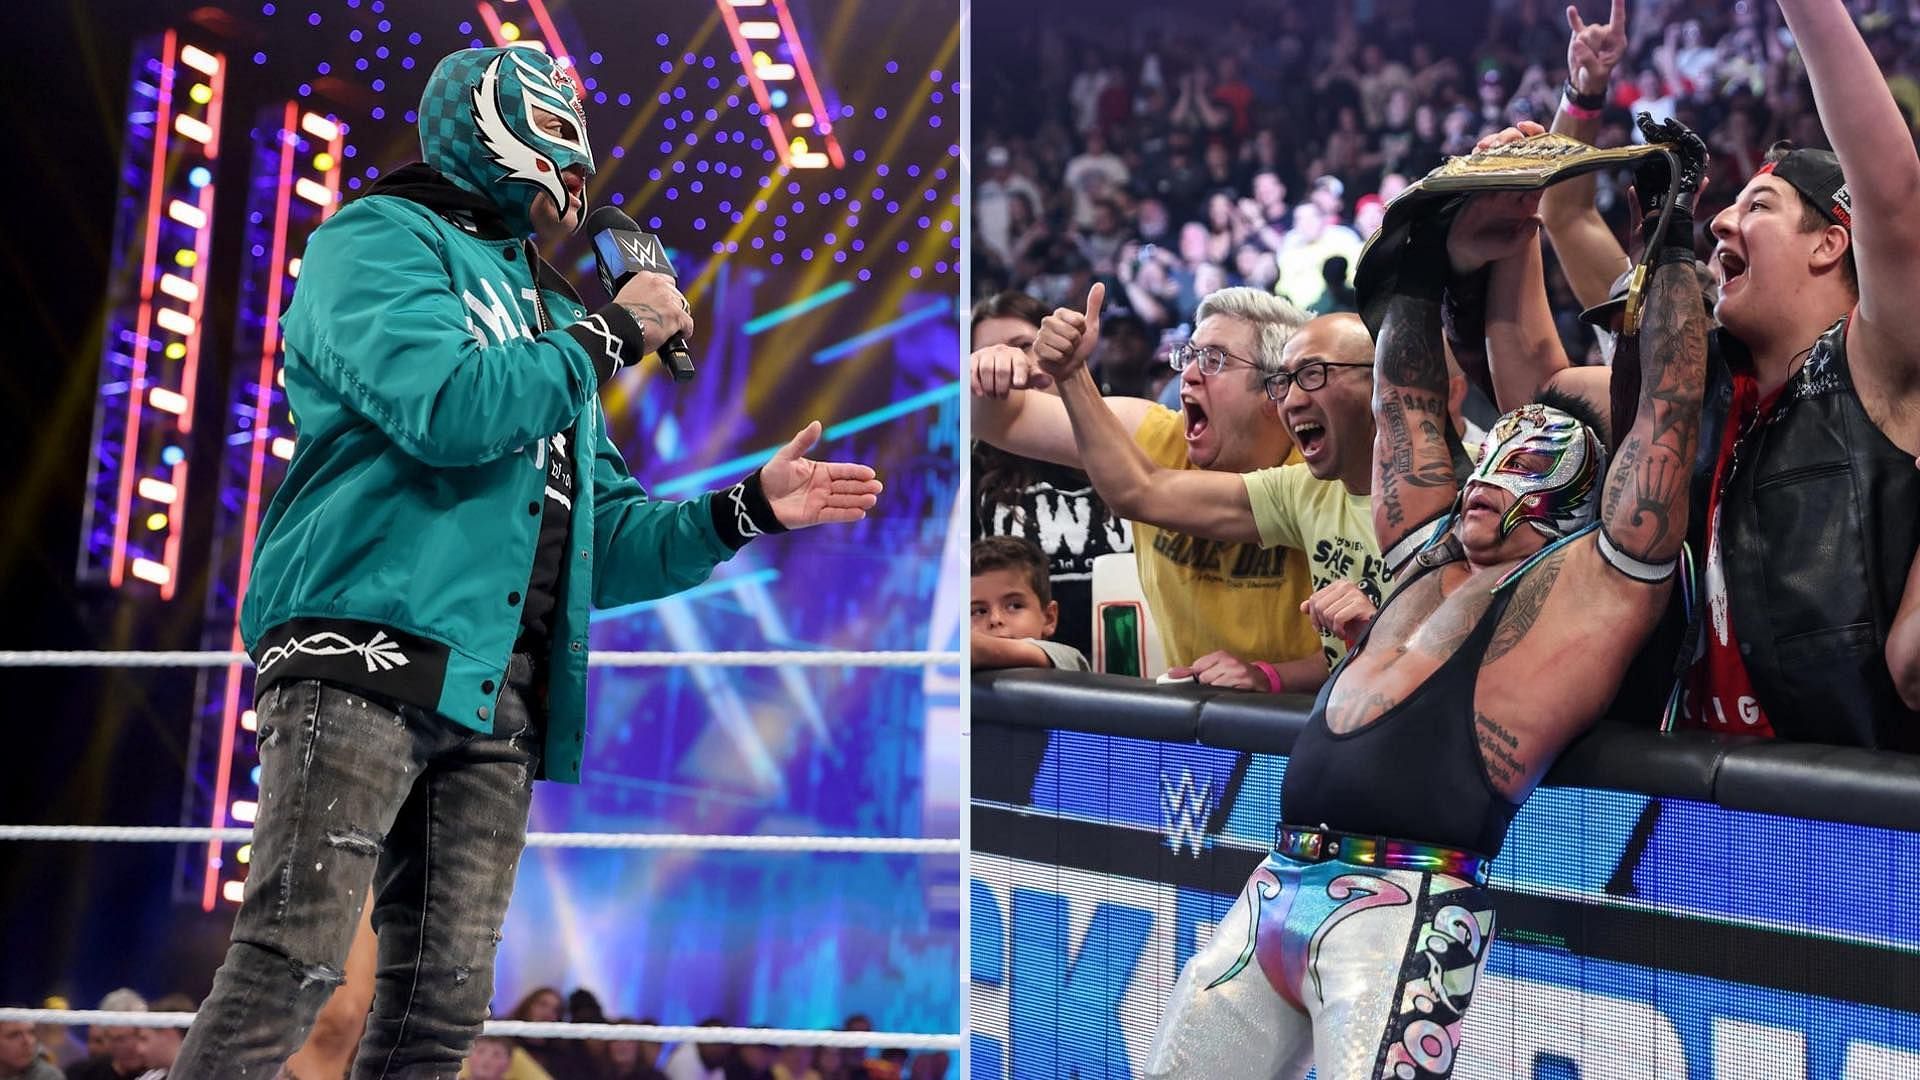 Rey Mysterio as seen at a WWE event.